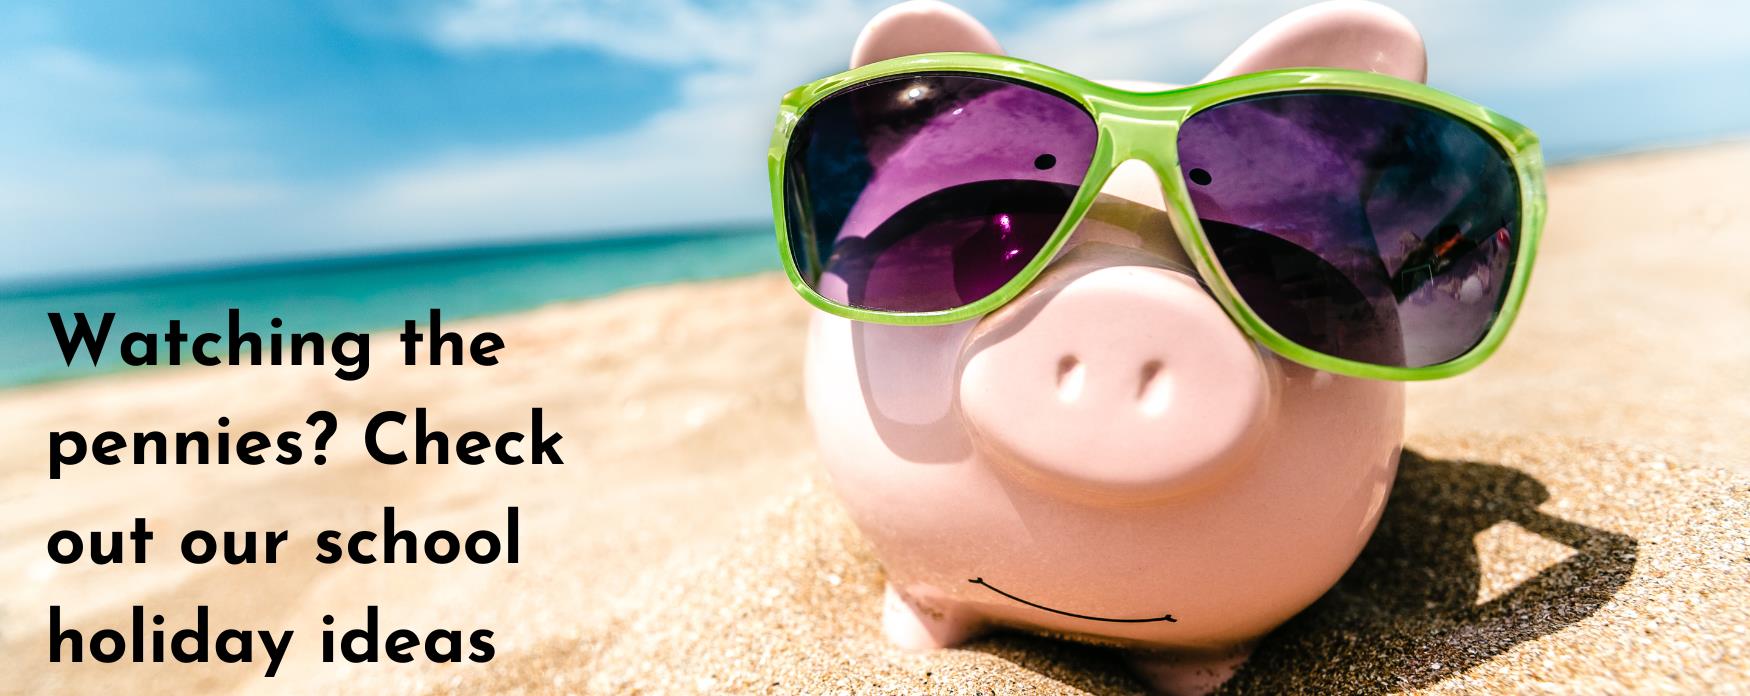 Piggy bank with sunglasses on by the beach